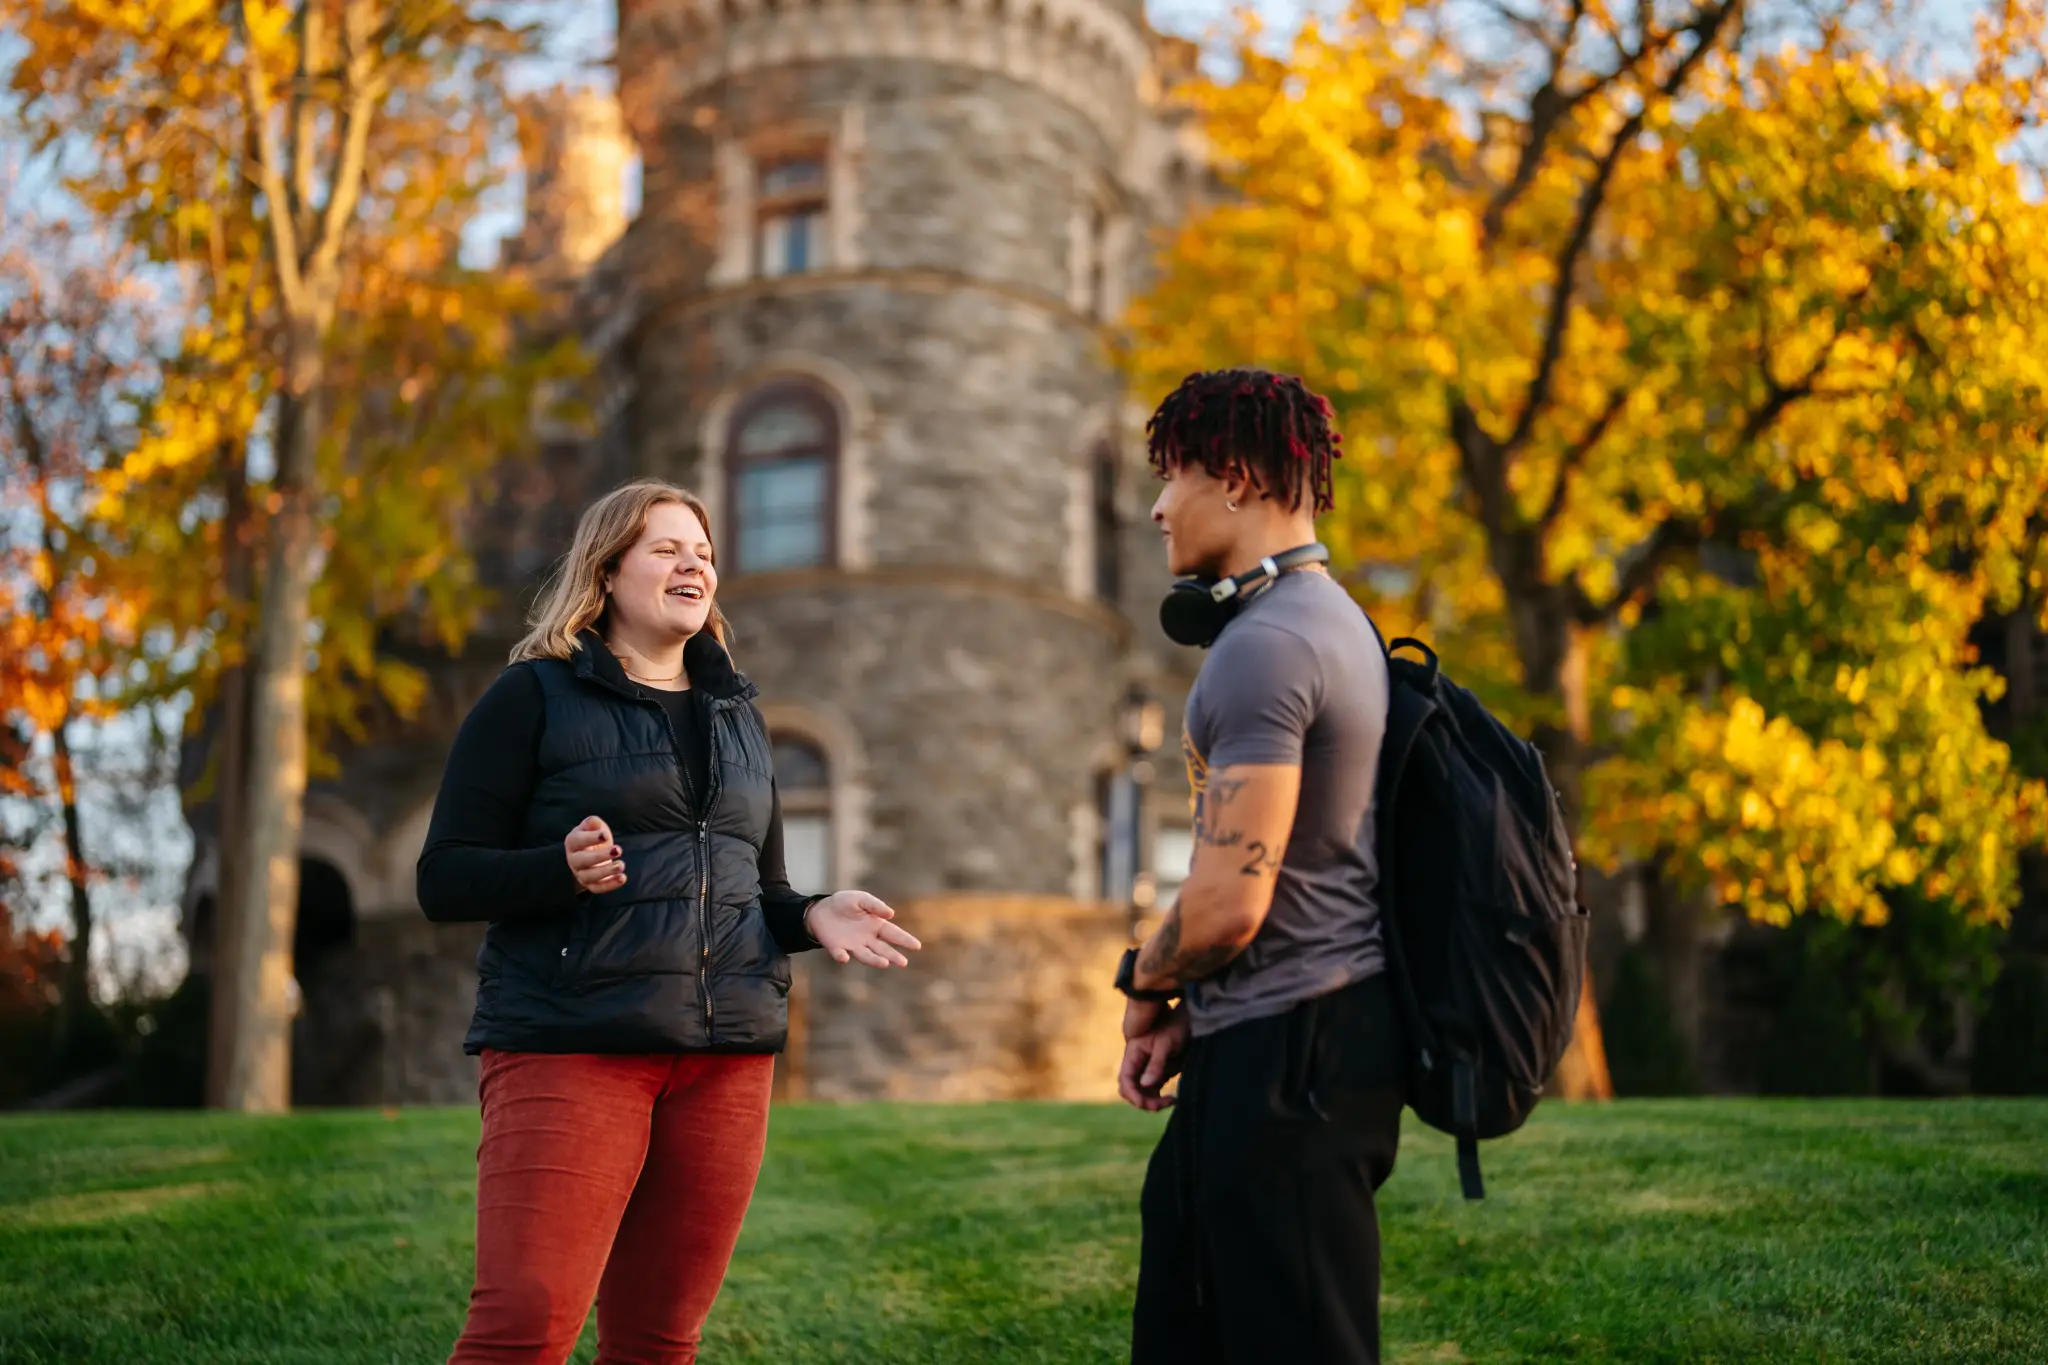 Students talking on campus with the Castle behind them